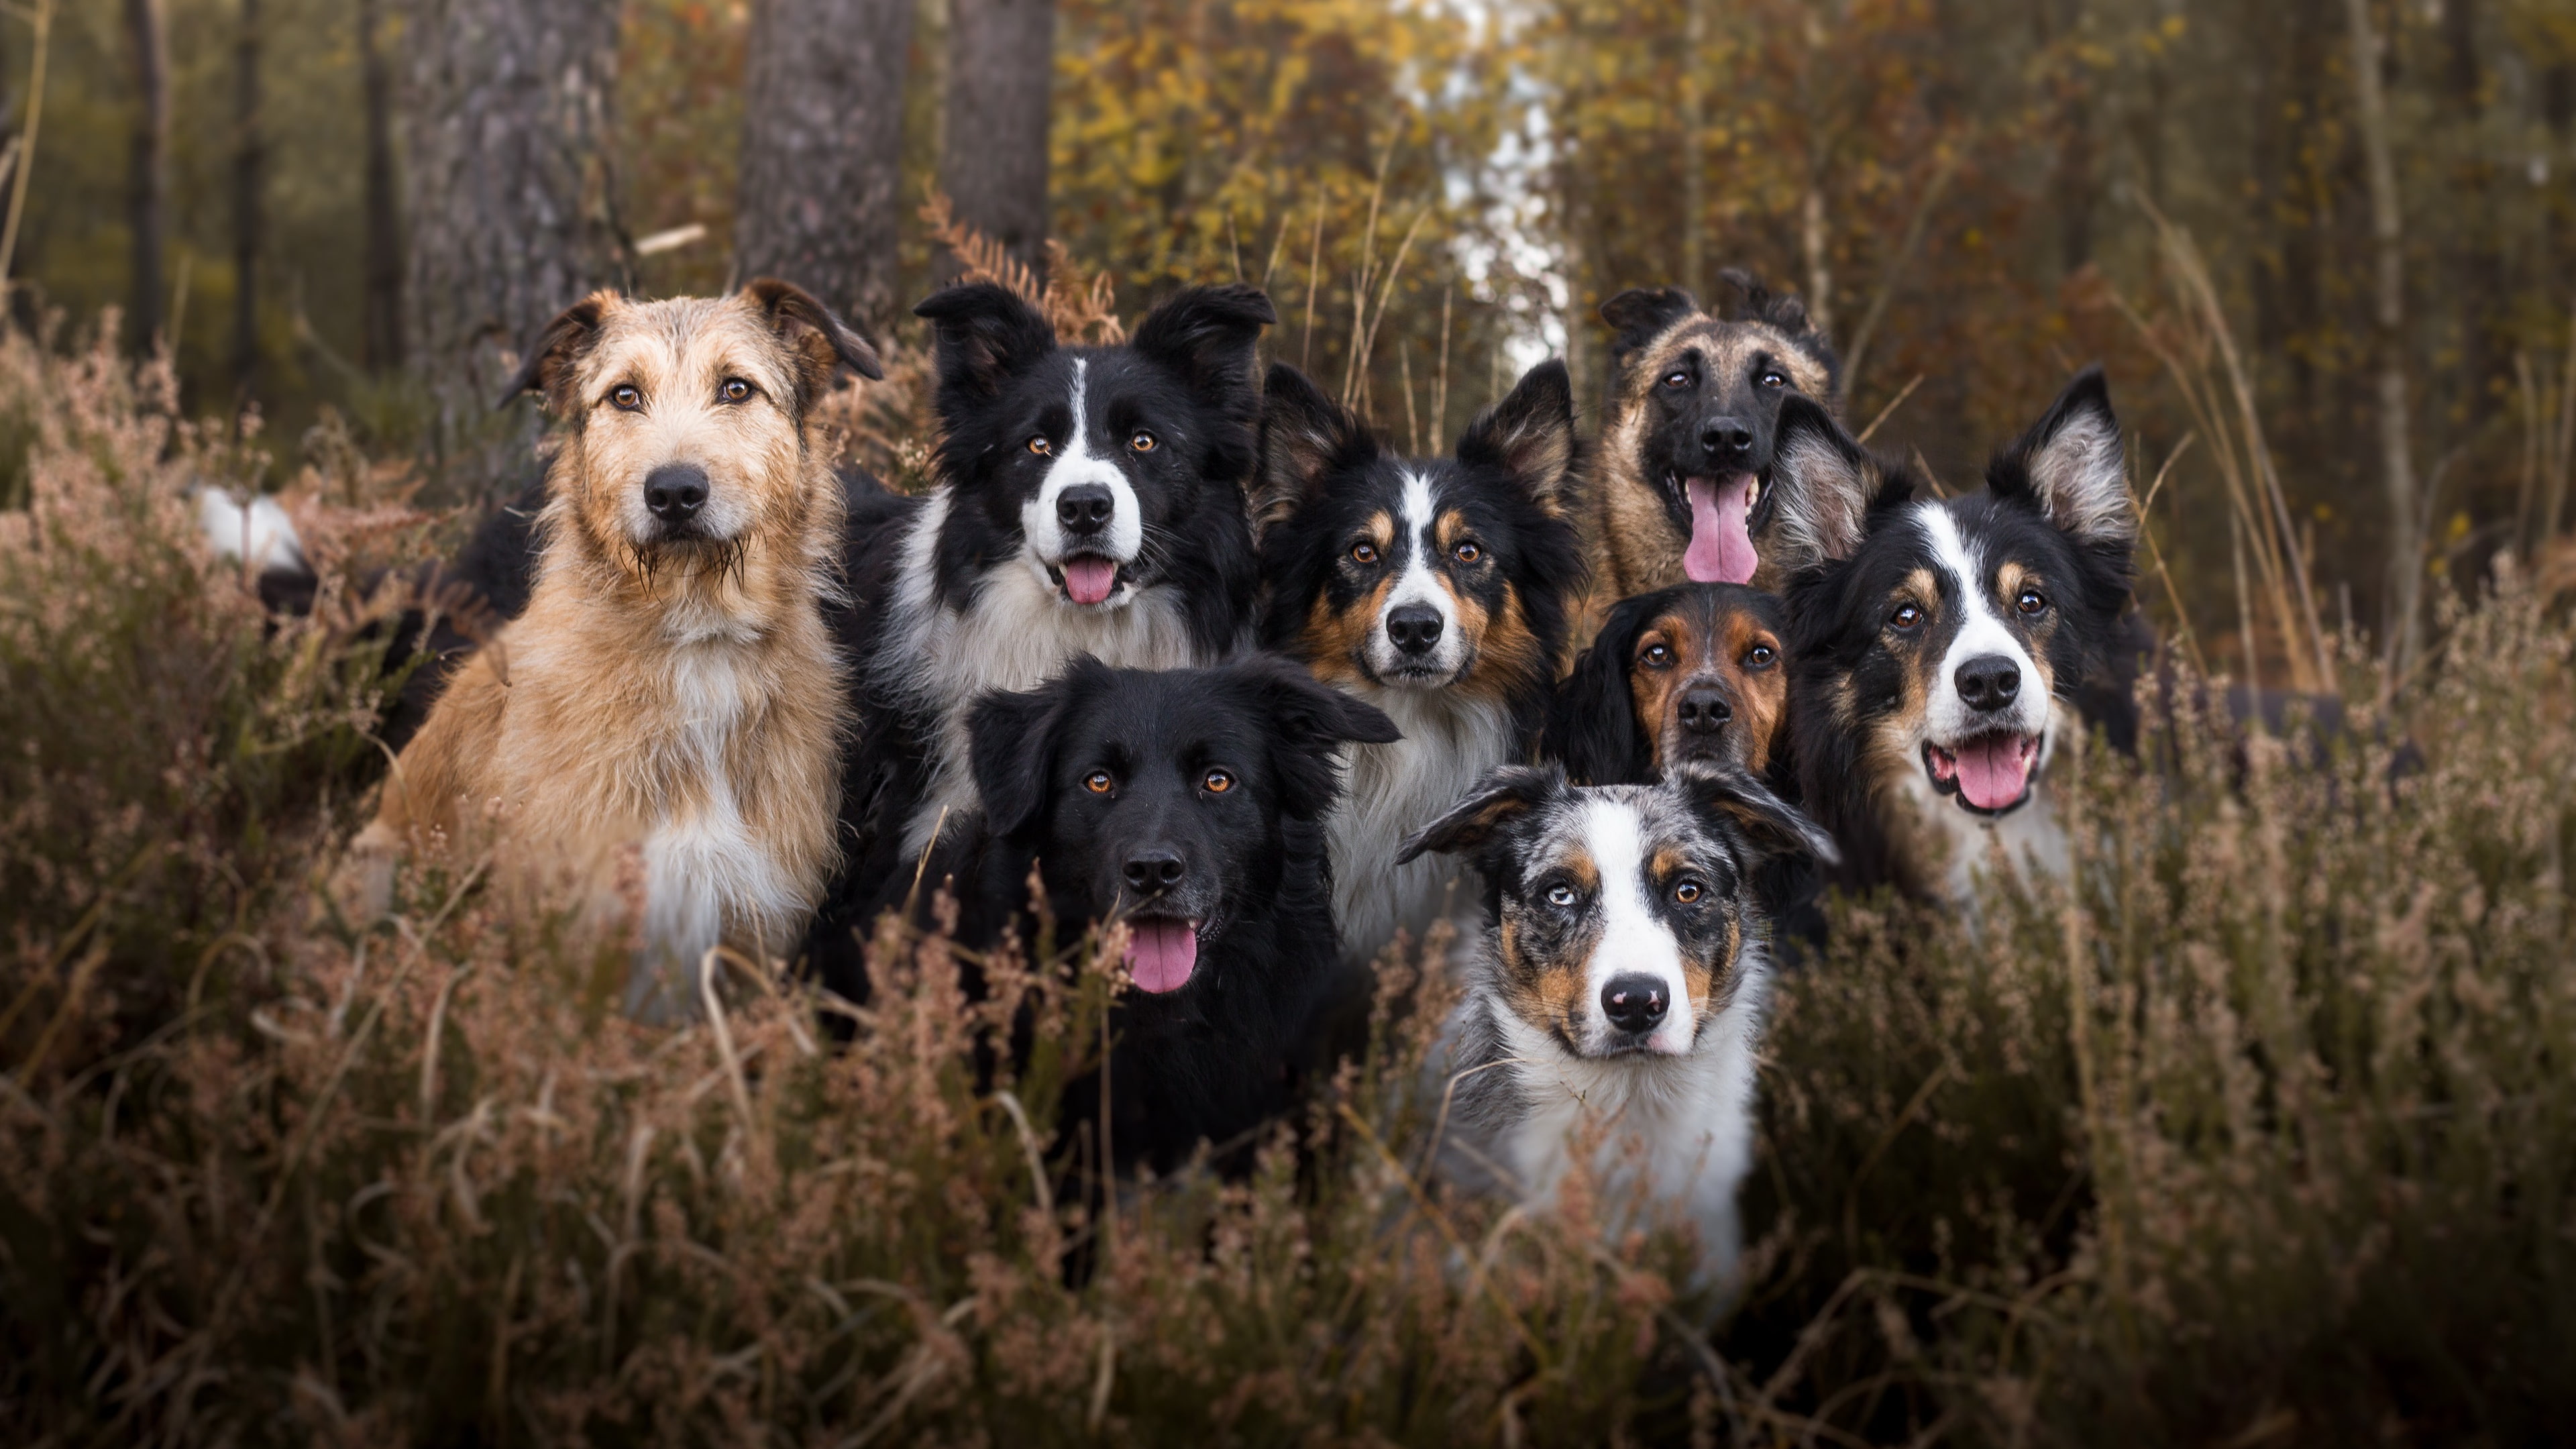 dog, dog breed, dog breed group, dogs, border collie, forest